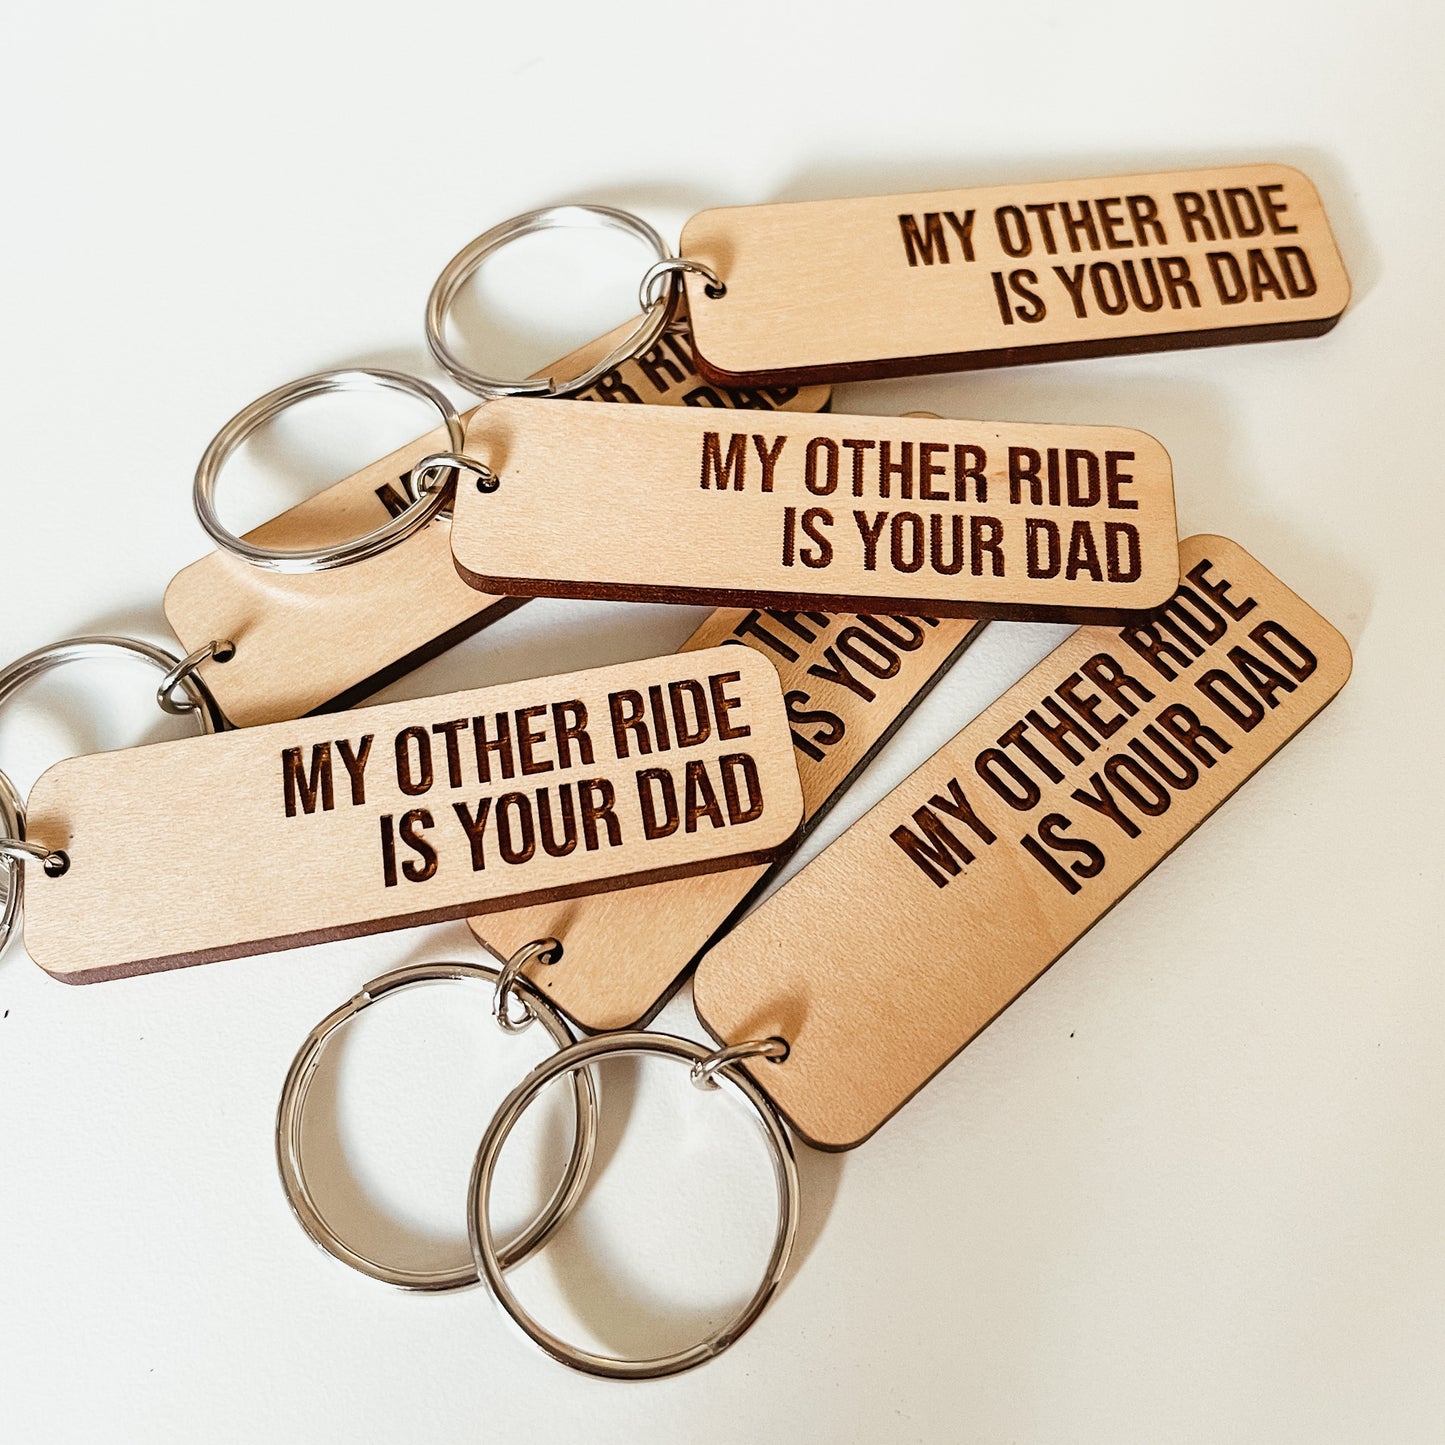 My Other Ride Is Your Dad Keychain